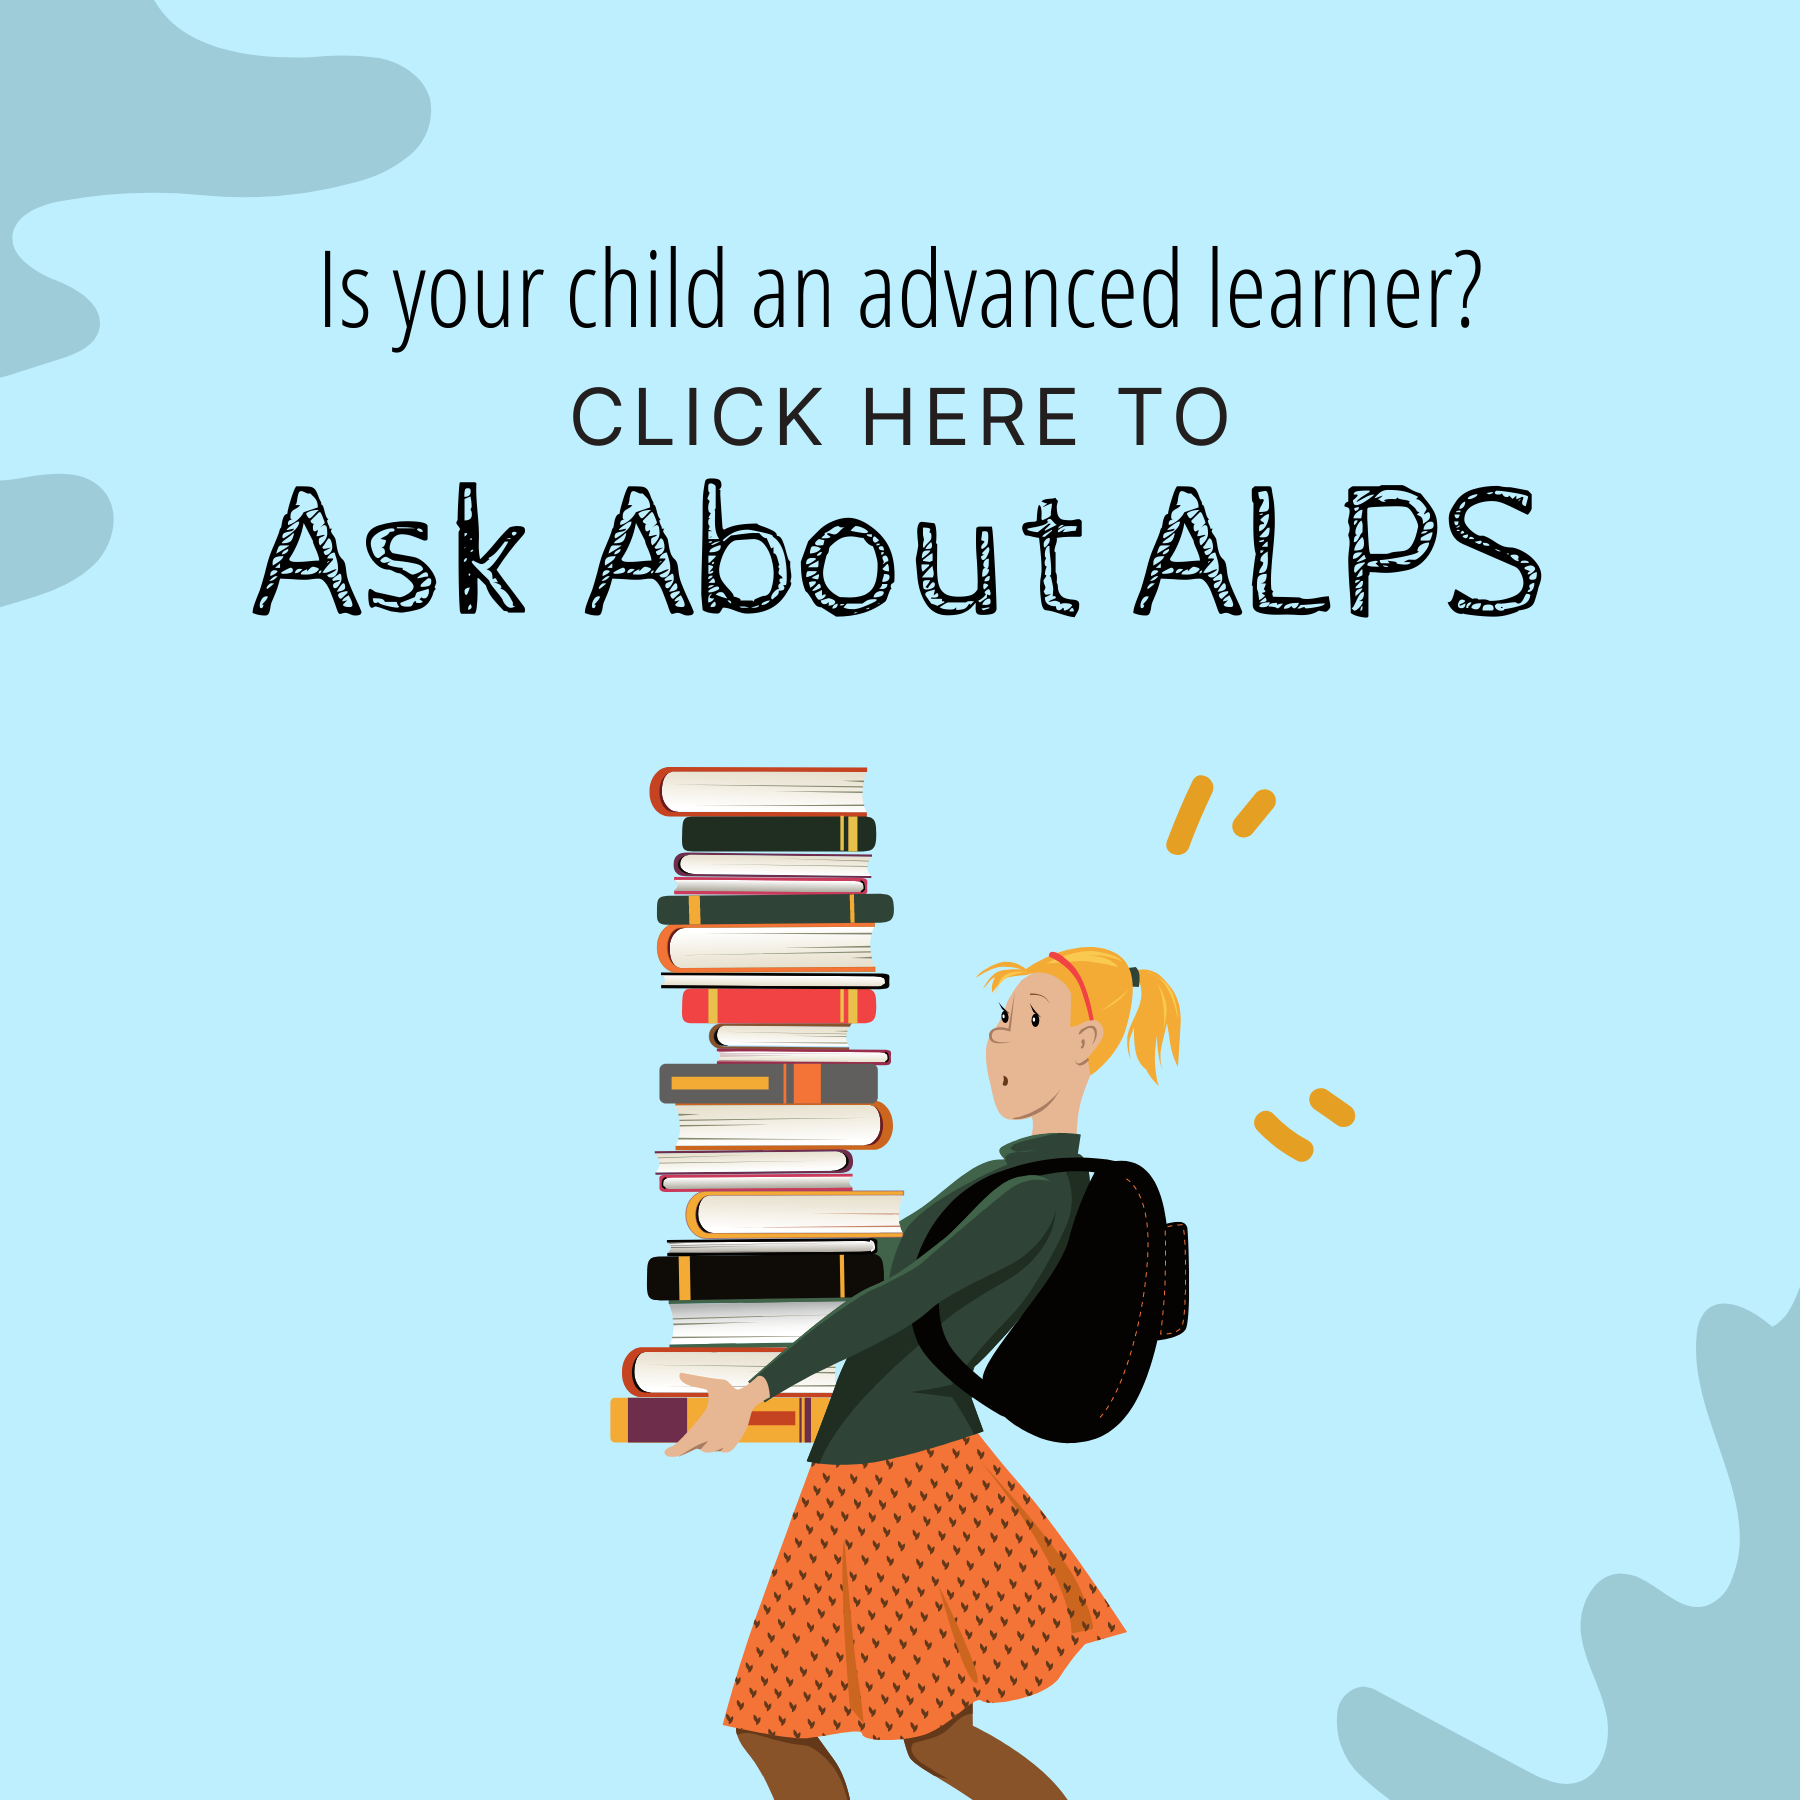 Is your child an advanced learner? Click here to ask about ALPS.